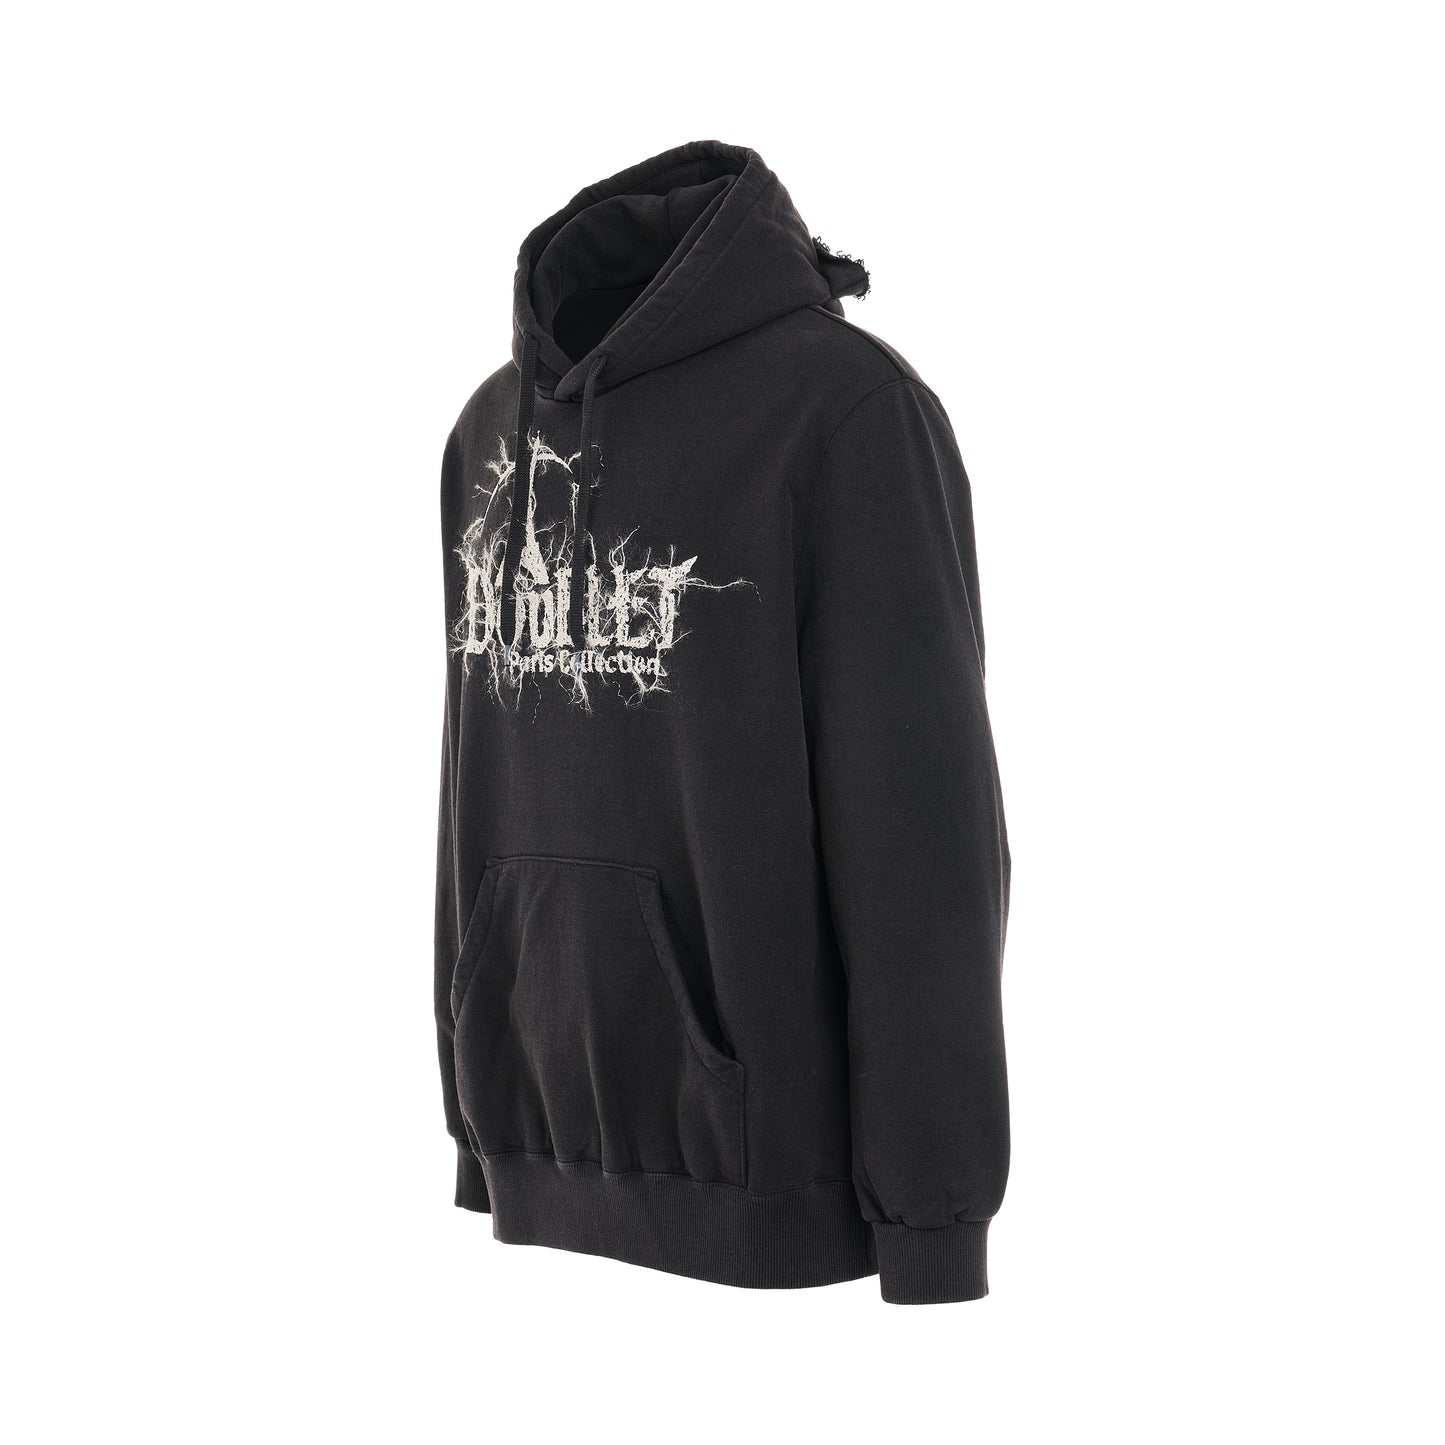 "DOUBLAND" Embroidery Hoodie in Black